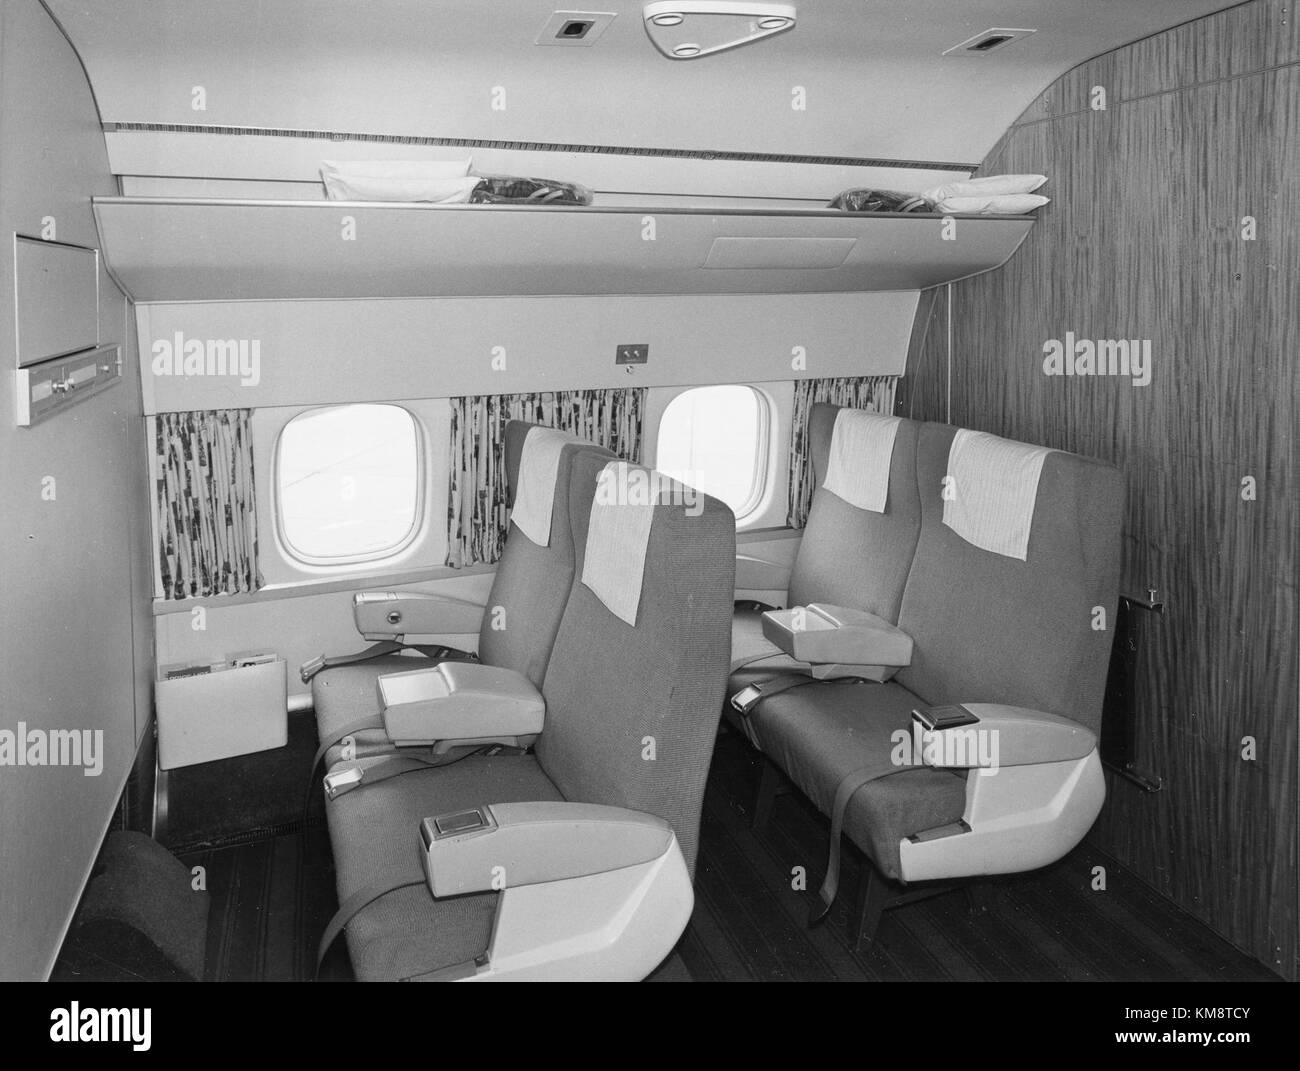 Sas Dc 8 33 Interior And Design Before Delivery Cabin And